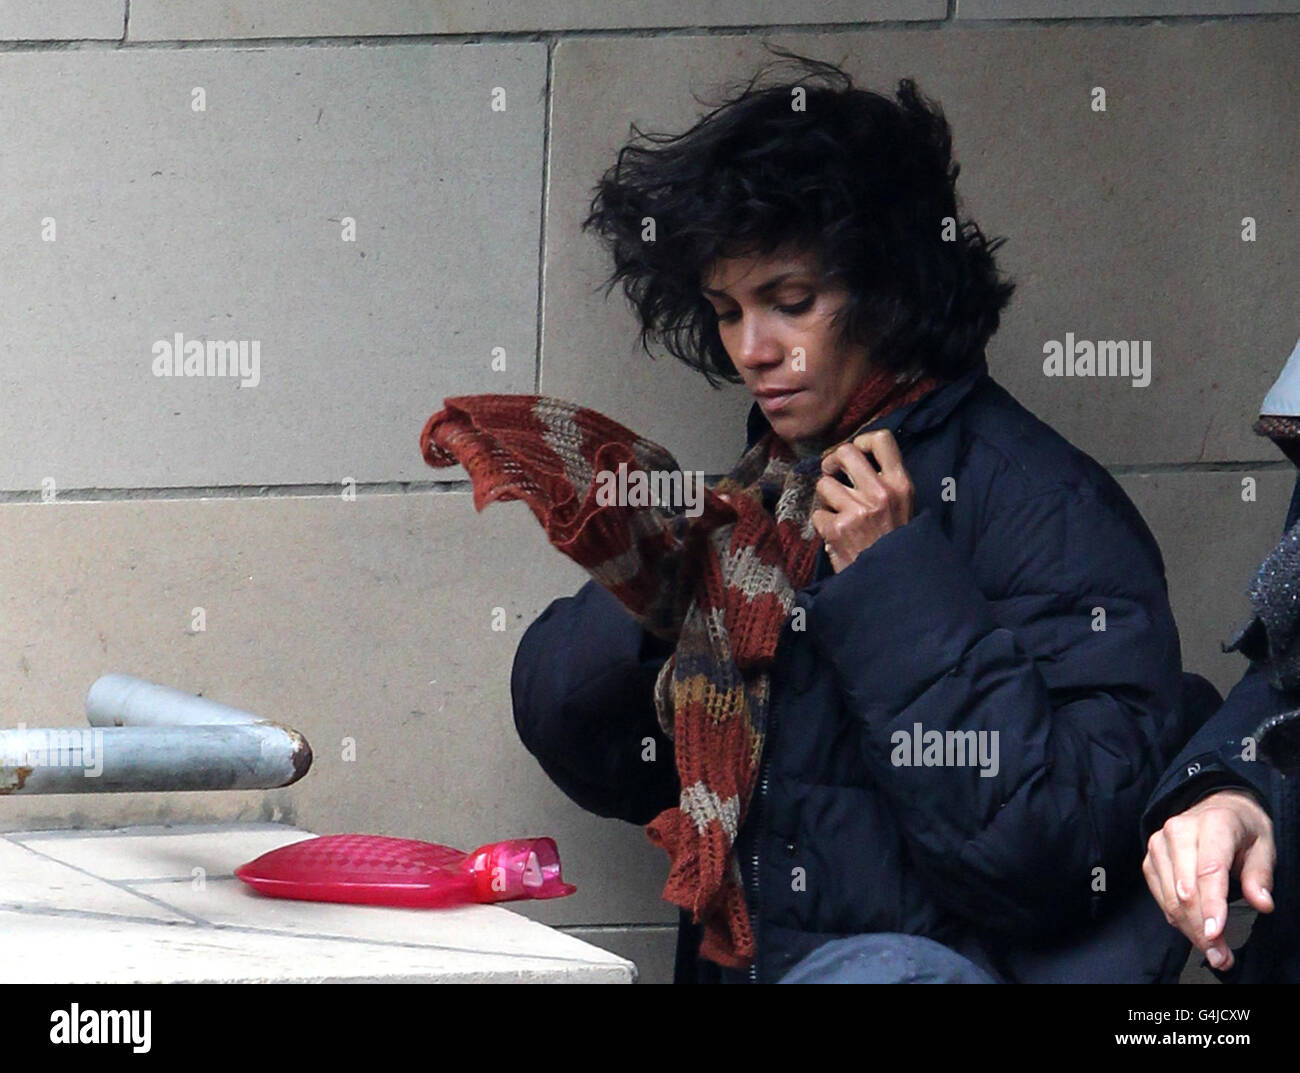 Halle Berry trys to keep warm between takes on the set of her new film Cloud Atlas which is currently being filmed in Glasgow. The film also stars Tom Hanks. Stock Photo